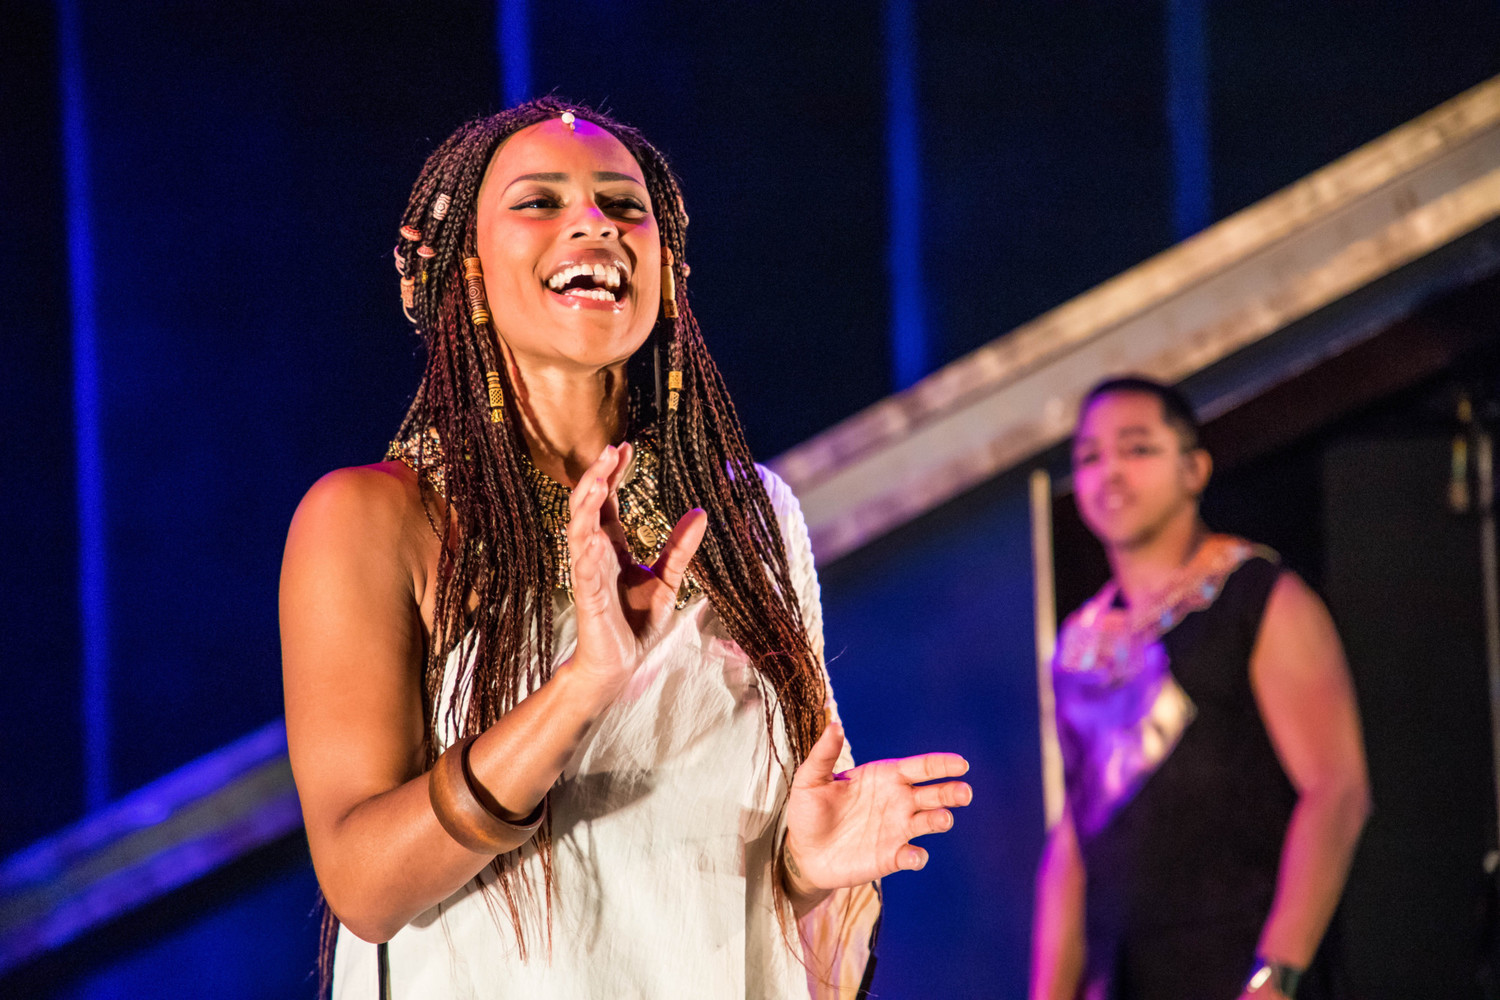 Feature: Representation on beautiful display in AIDA at Constellation Theatre 